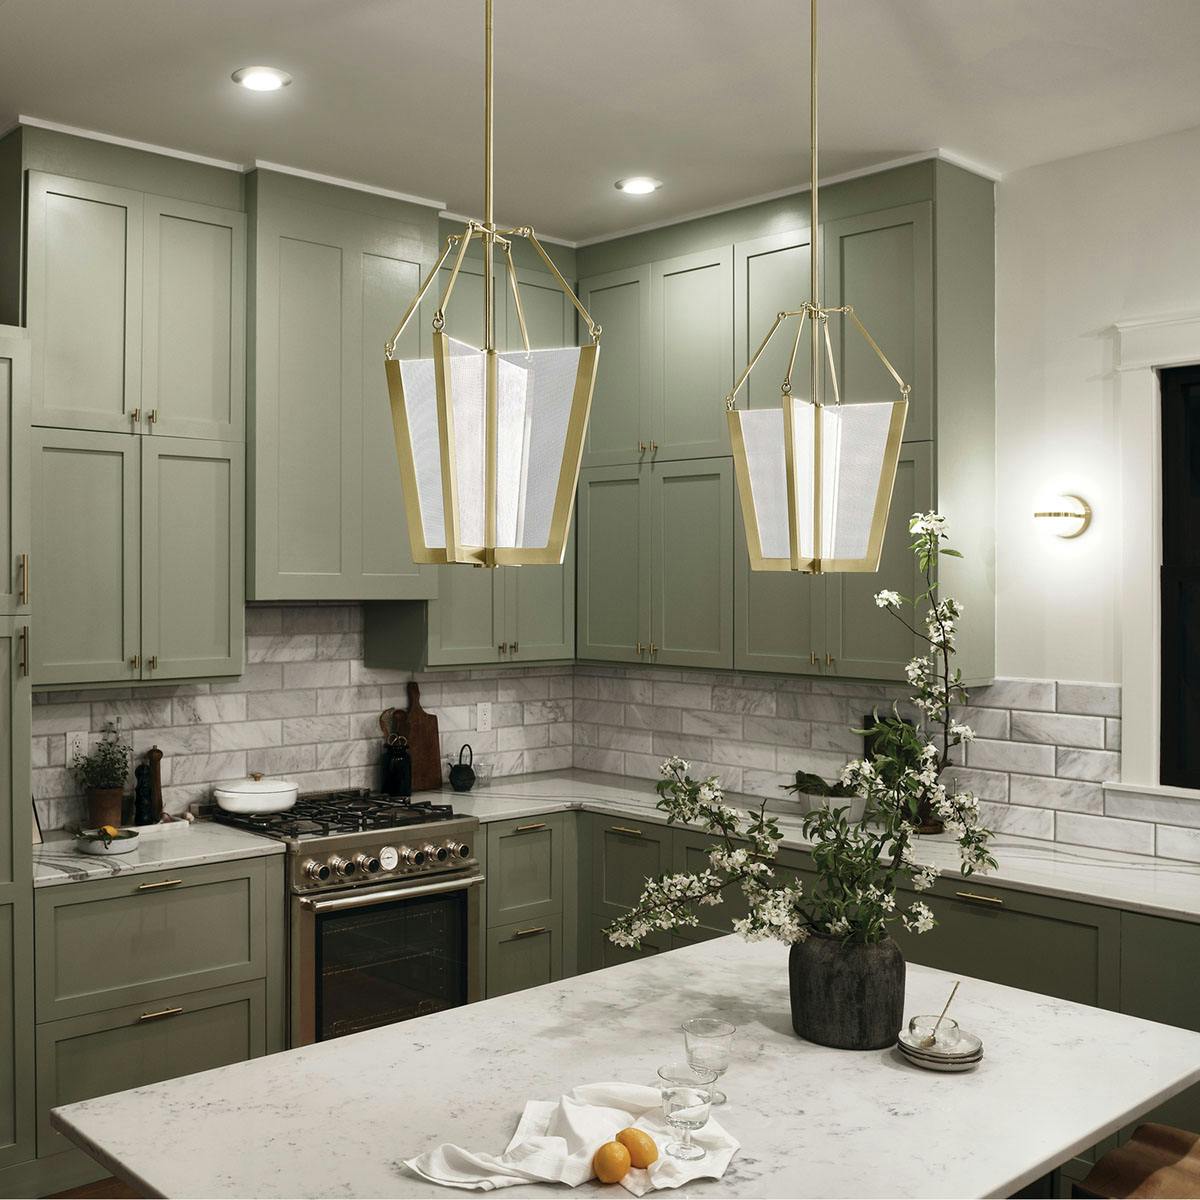 Night time Kichen image featuring Calters pendant 52291CGLED